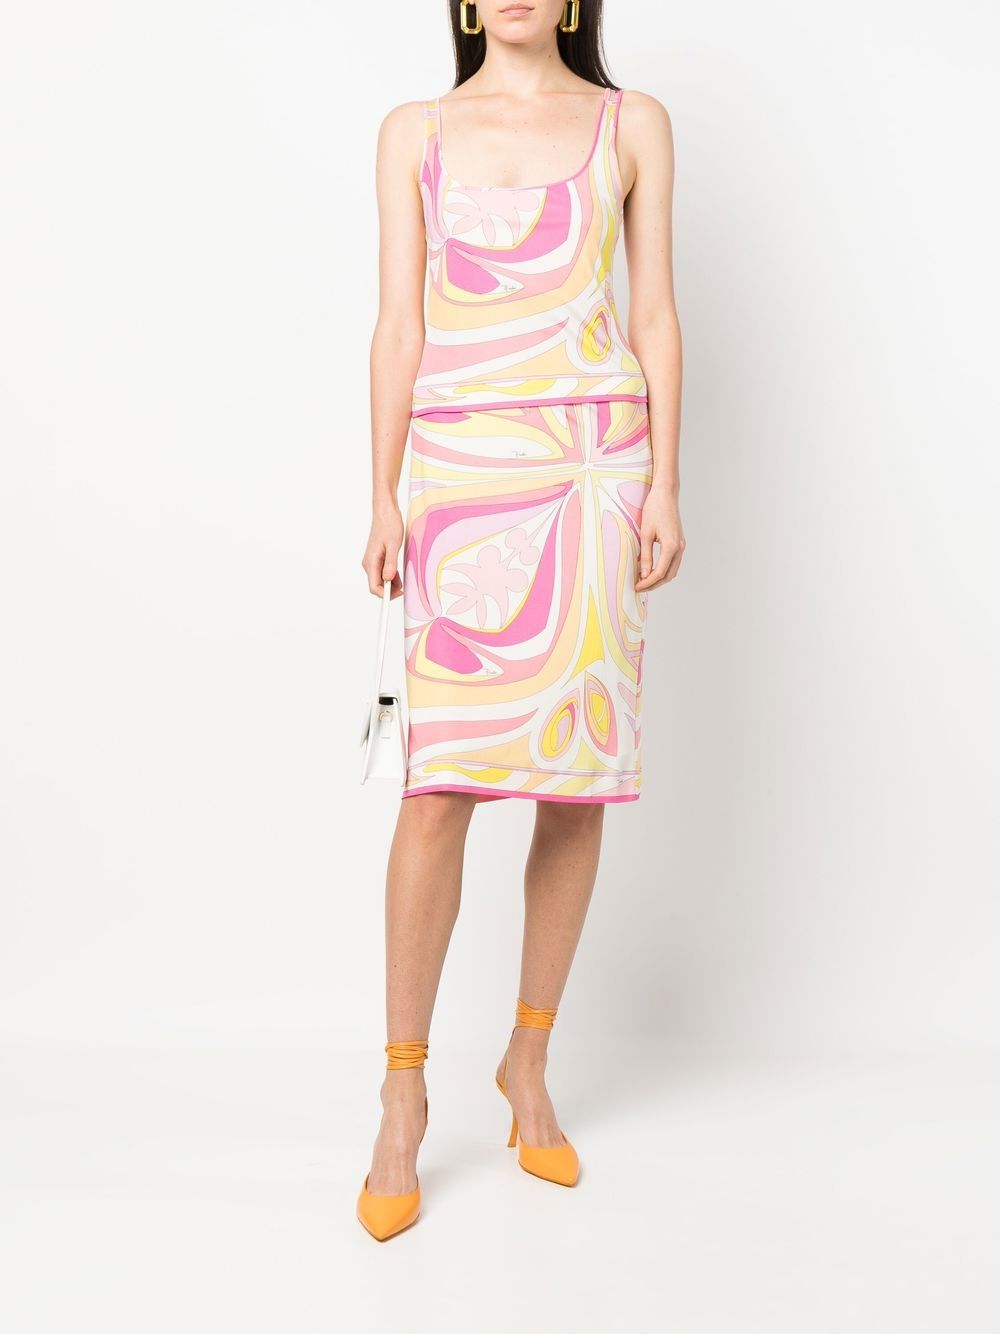 PUCCI Pre-Owned 2000s rok met abstracte print - Roze